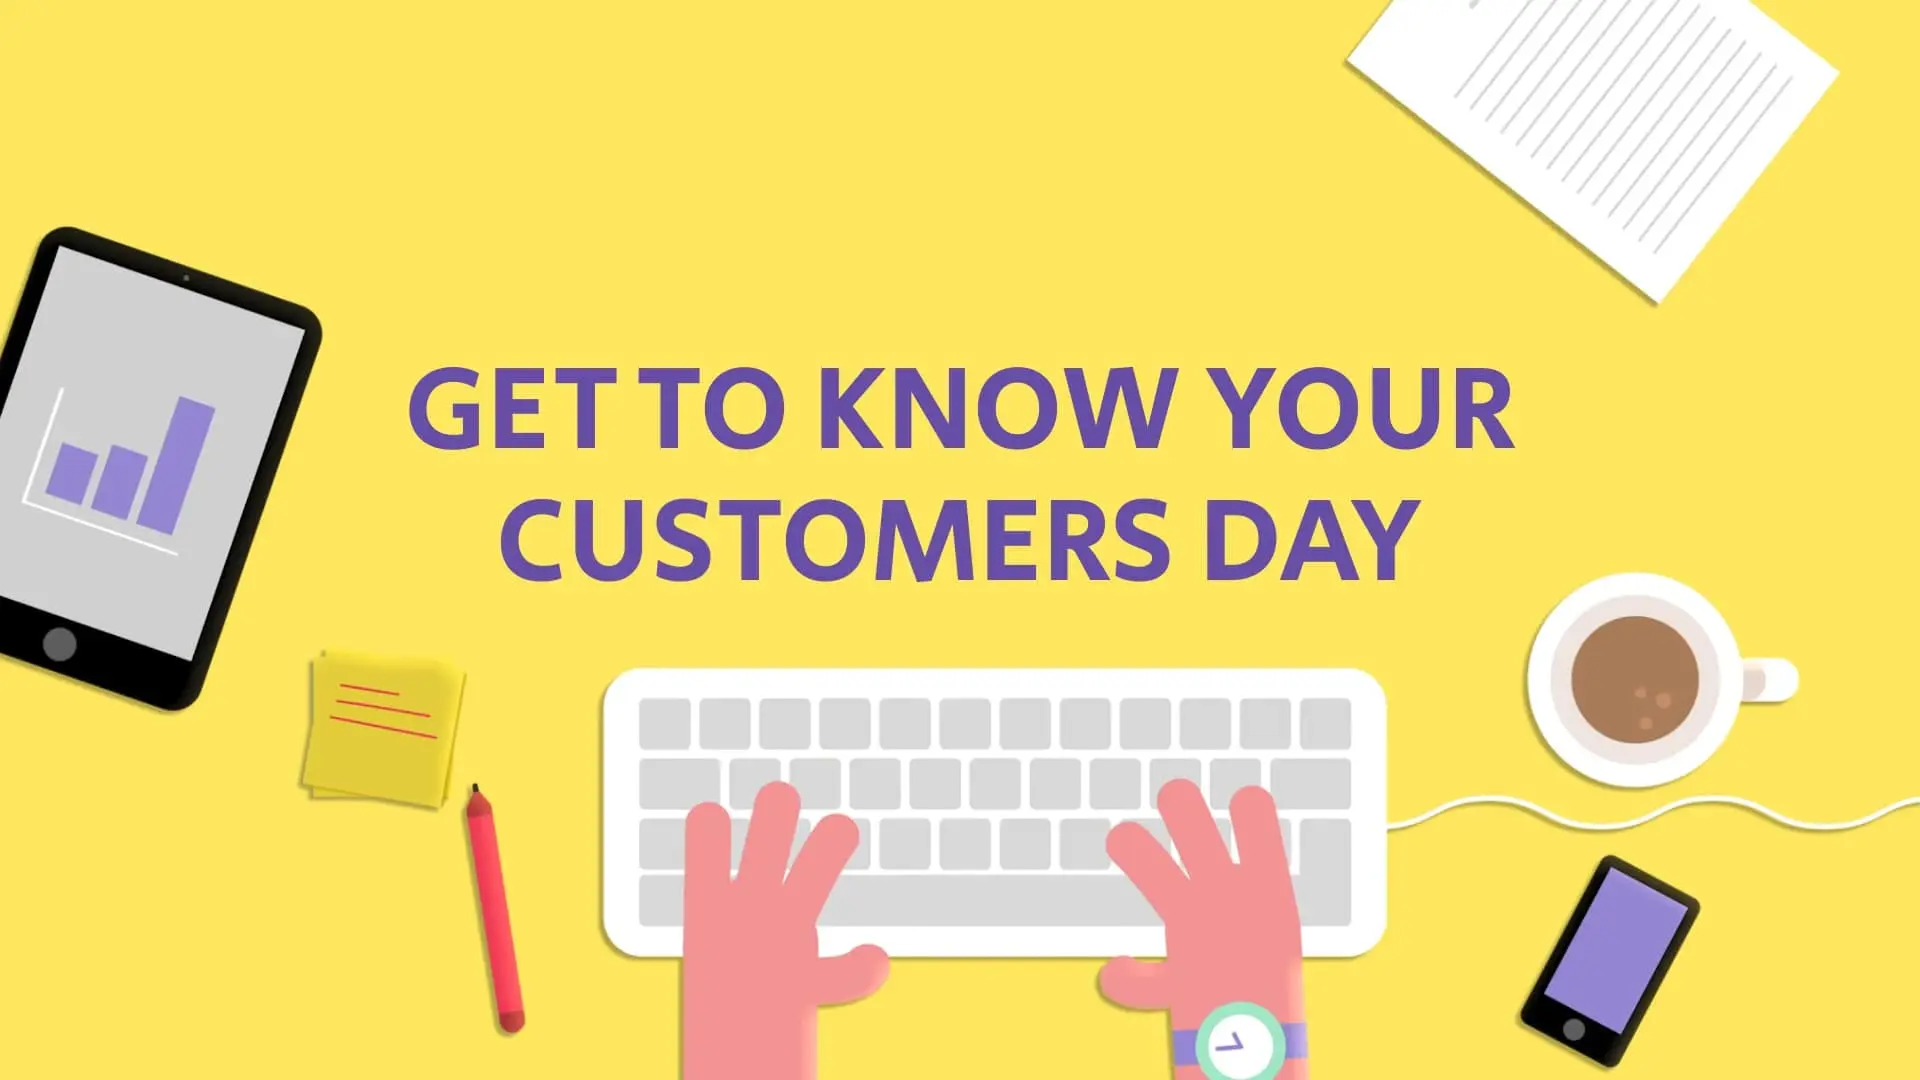 Get To Know Your Customers Day | LitCommerce